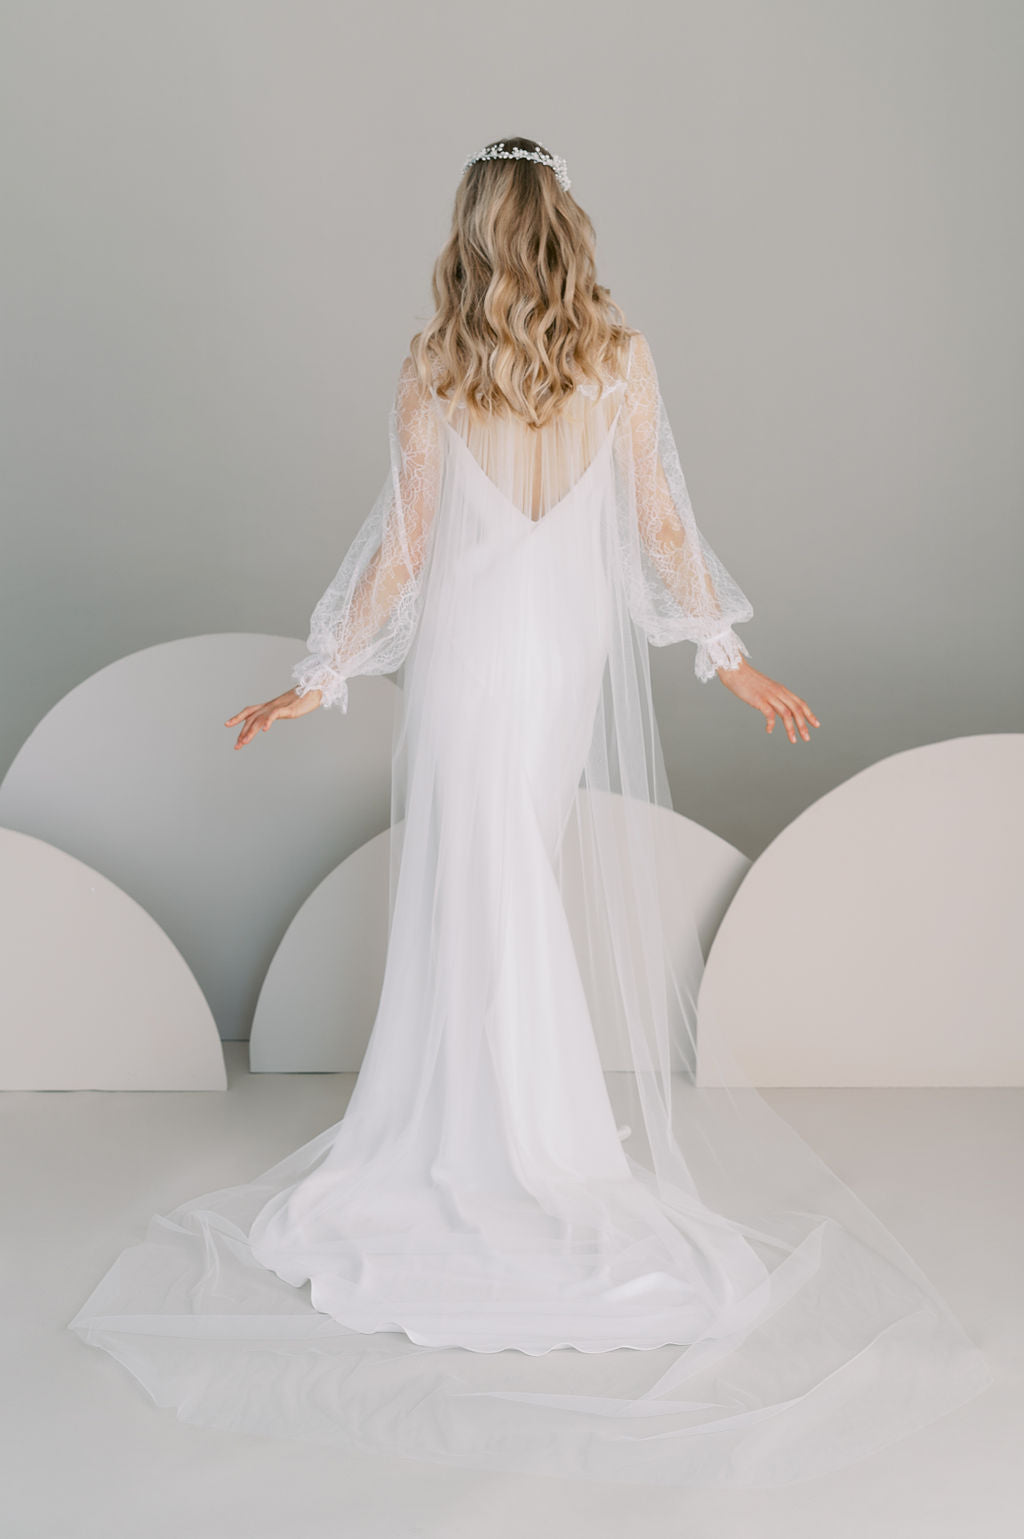 Long lace tulle wedding cape. Handmade by Catherine Langlois, Toronto, Canada